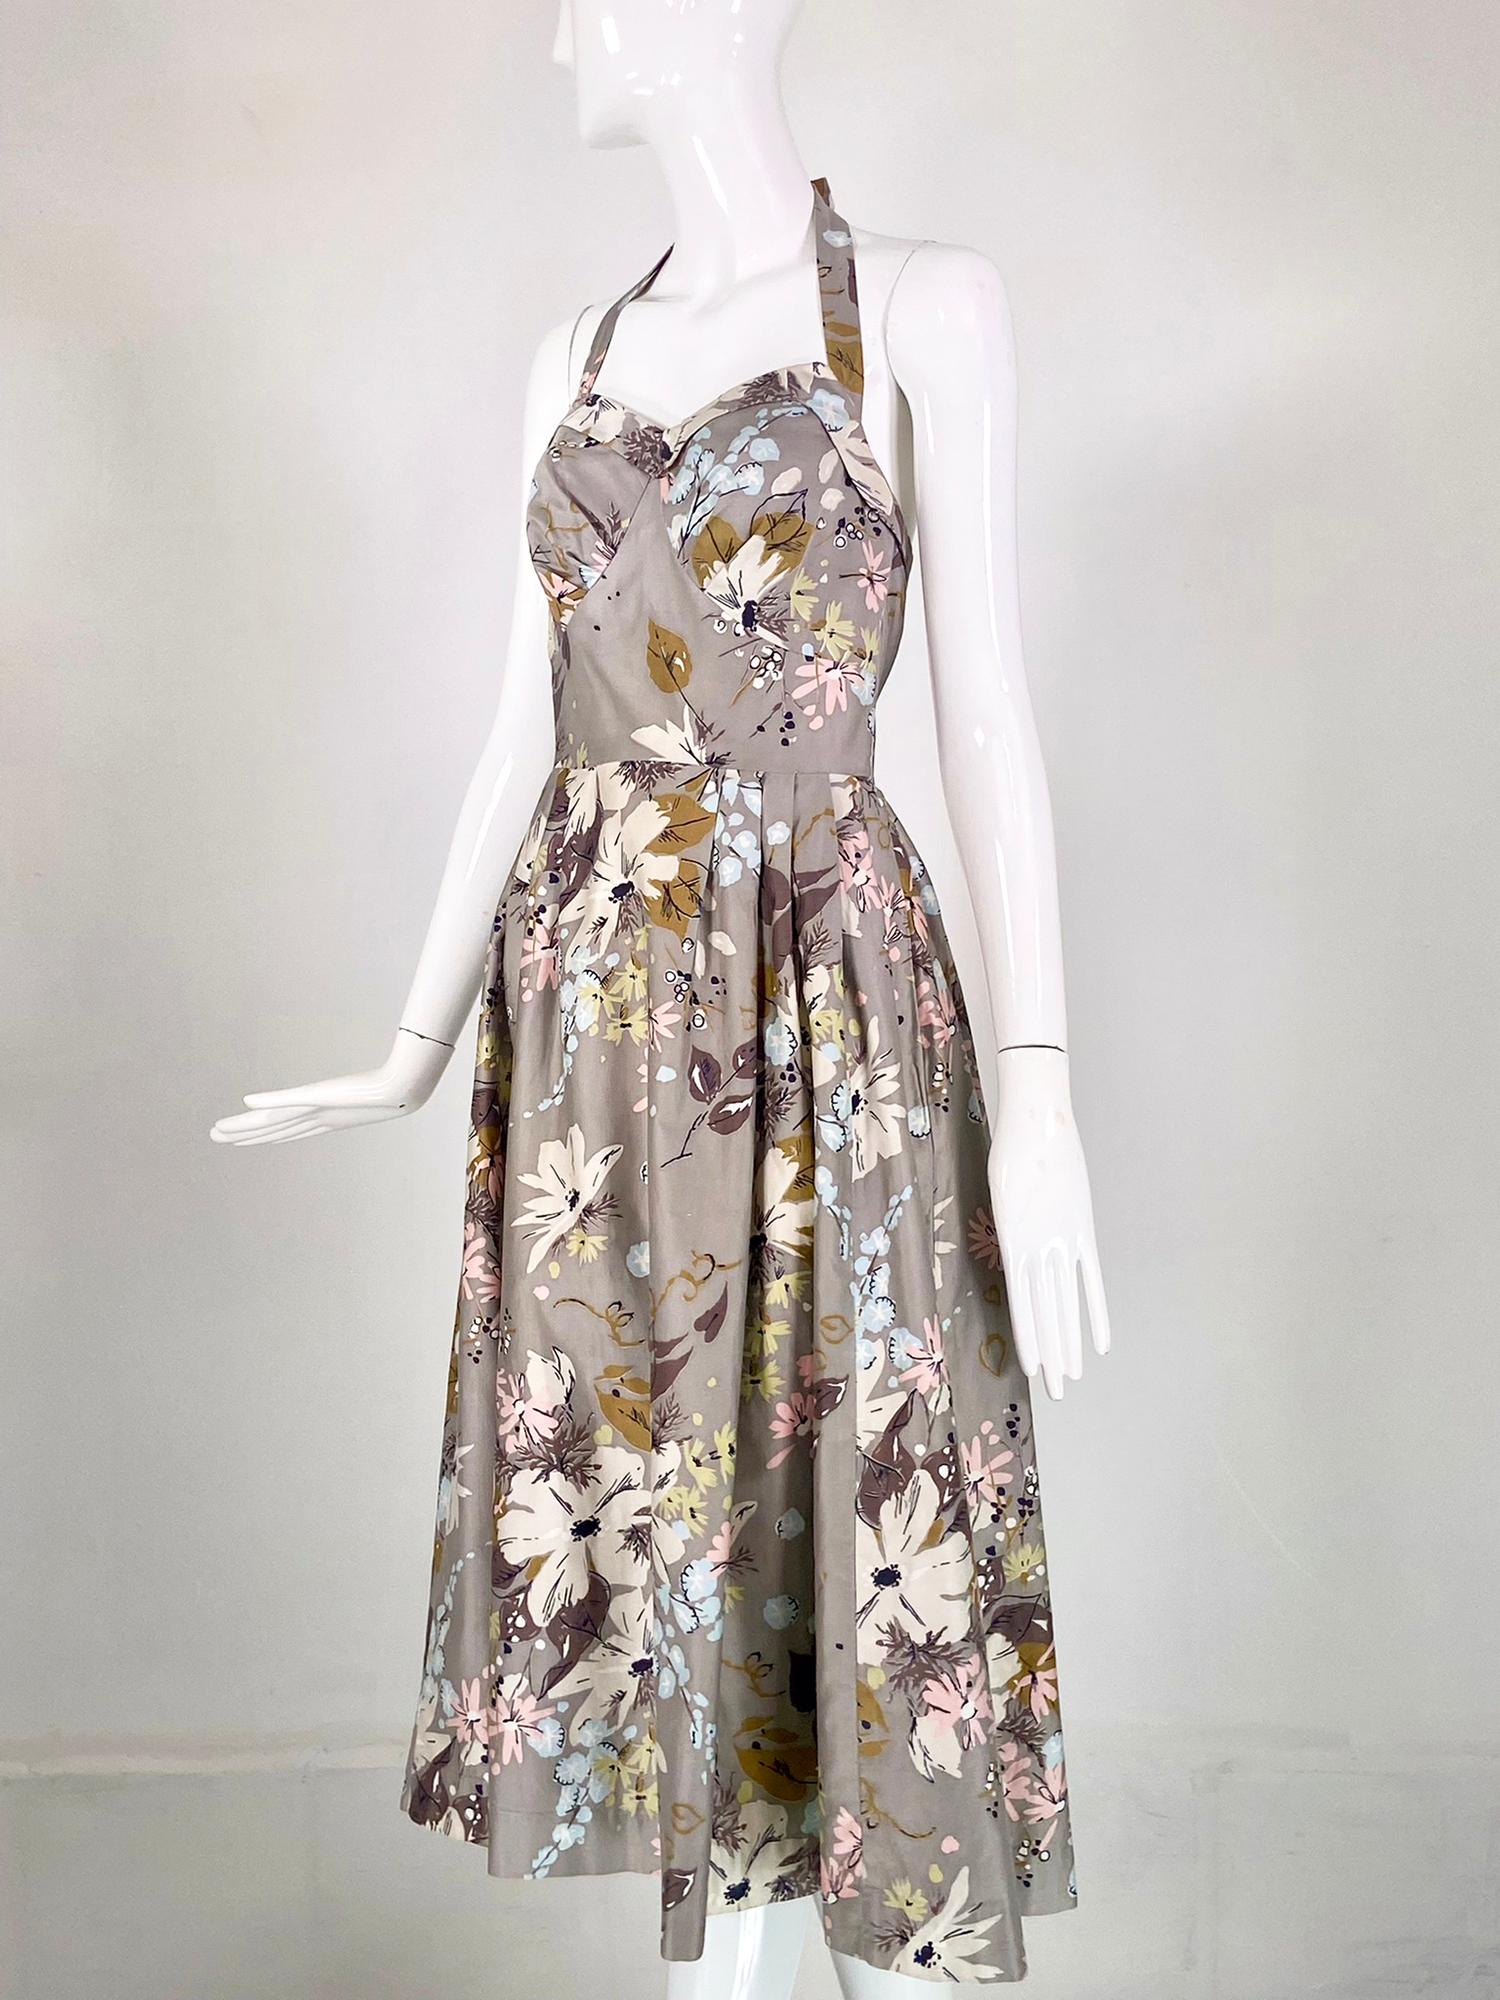 Alex of Miami halter neck modernist print sun dress from the 1950s. Florals with gold hearts cotton modernist print in grey, pink, gold, white and pale blue. Halter neck with sweetheart neckline, the neck strap closes at the back with two pink and